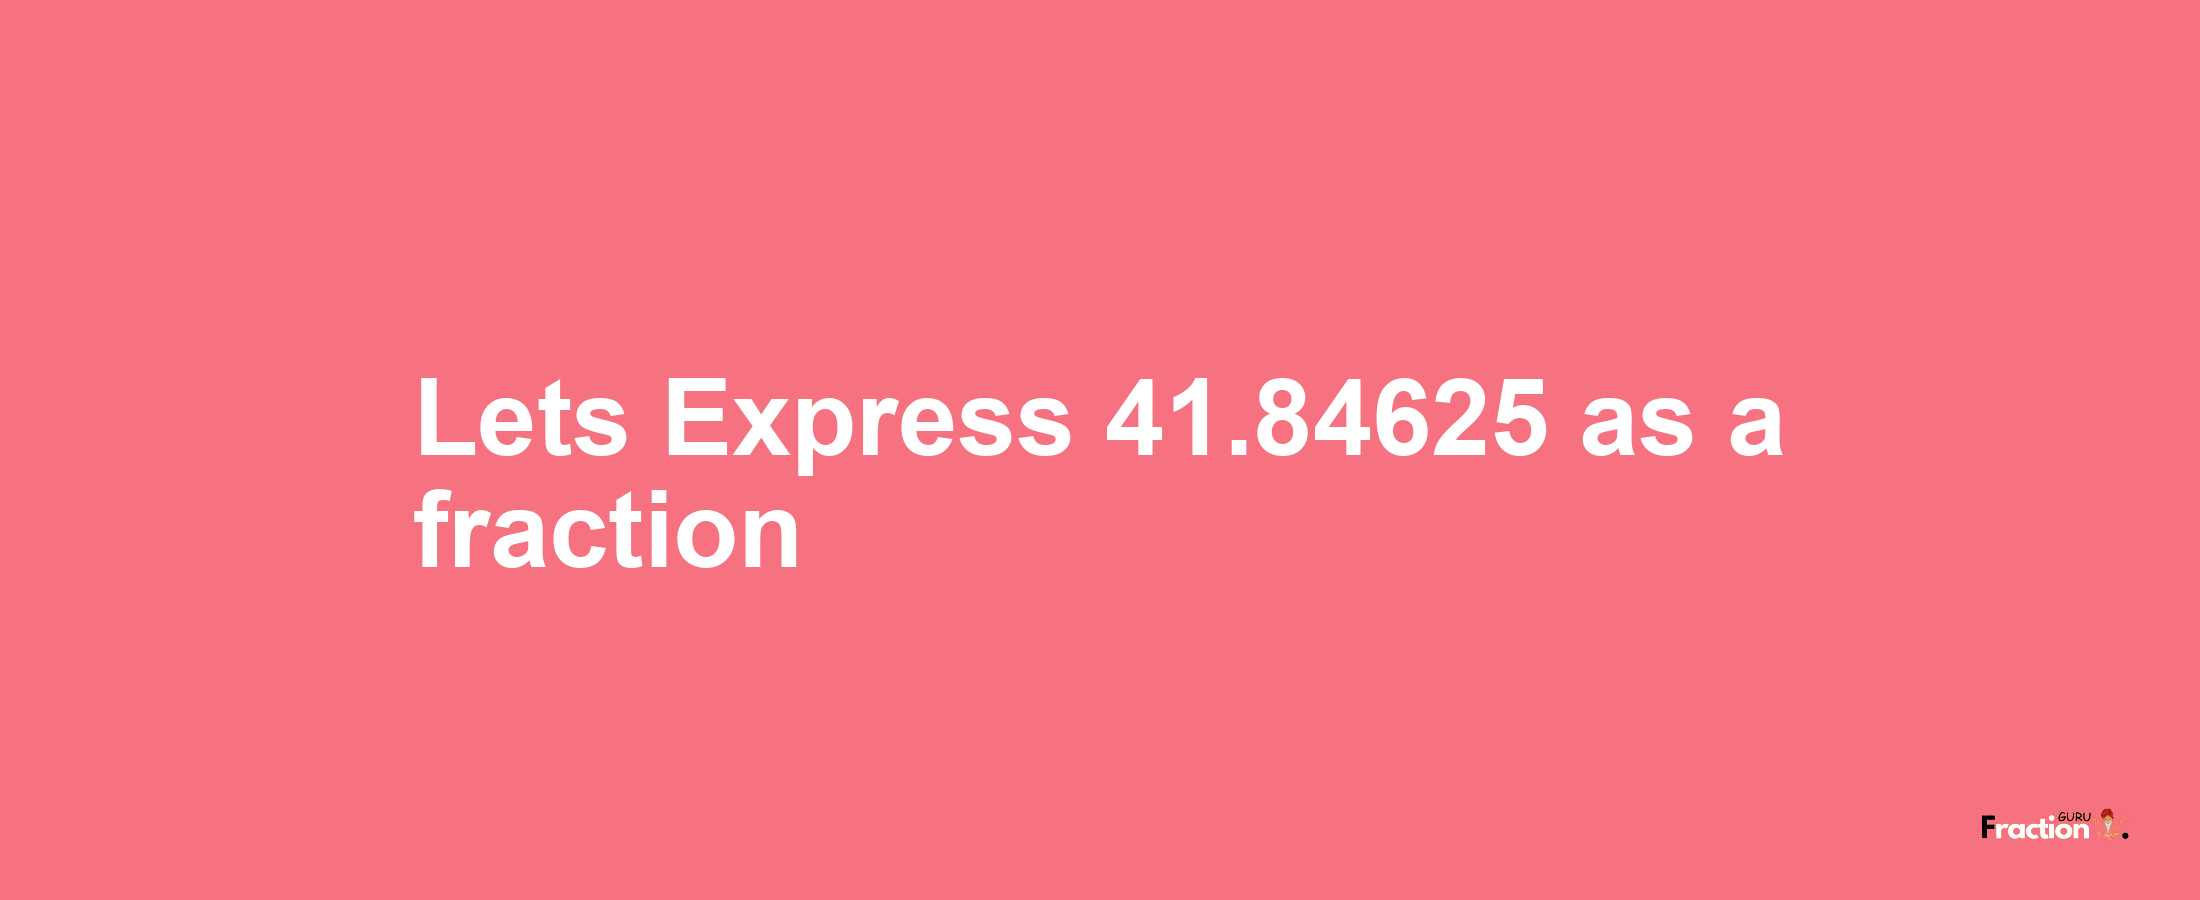 Lets Express 41.84625 as afraction